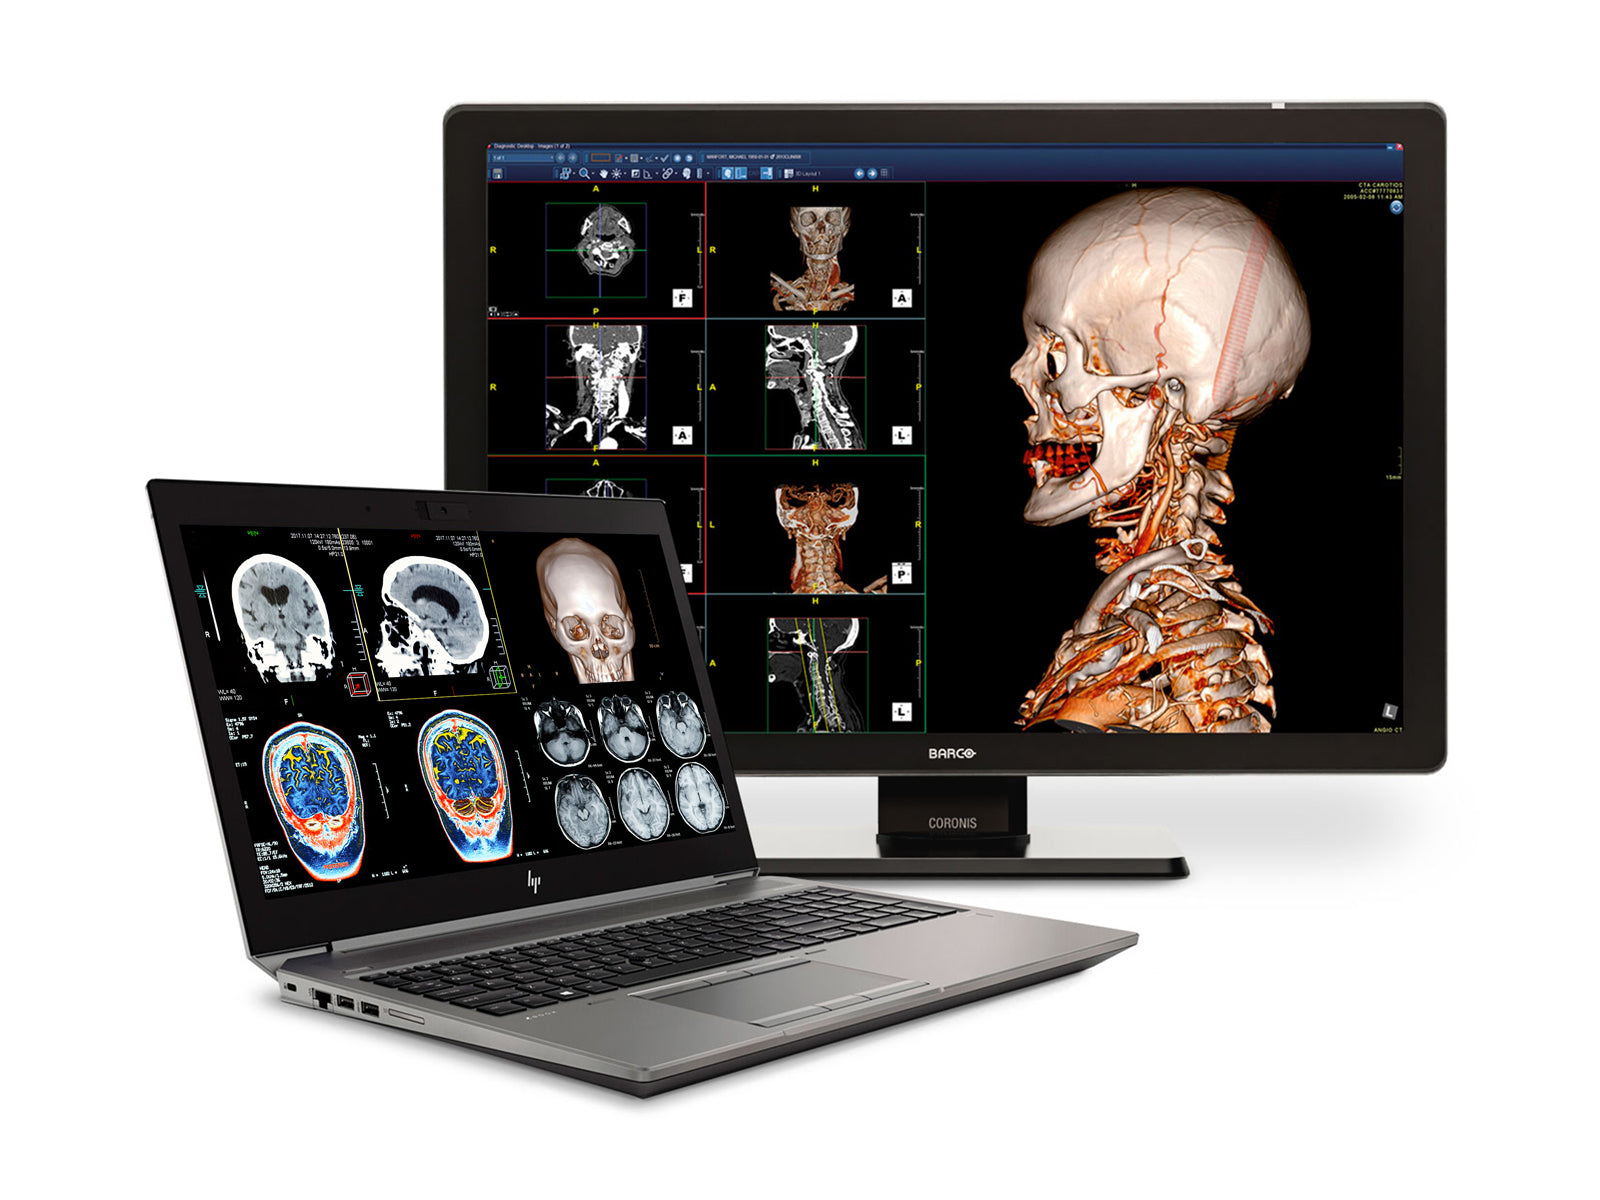 HP ZBook 15 G6 Mobile Radiology Workstation | 15.6" 8MP UHD DICOM Calibrated | Core i7-9850H @ 4.60GHz | 64GB DDR4 | 512GB NVMe SSD | NVIDIA Quadro RTX 3000 6GB | Win10 Pro